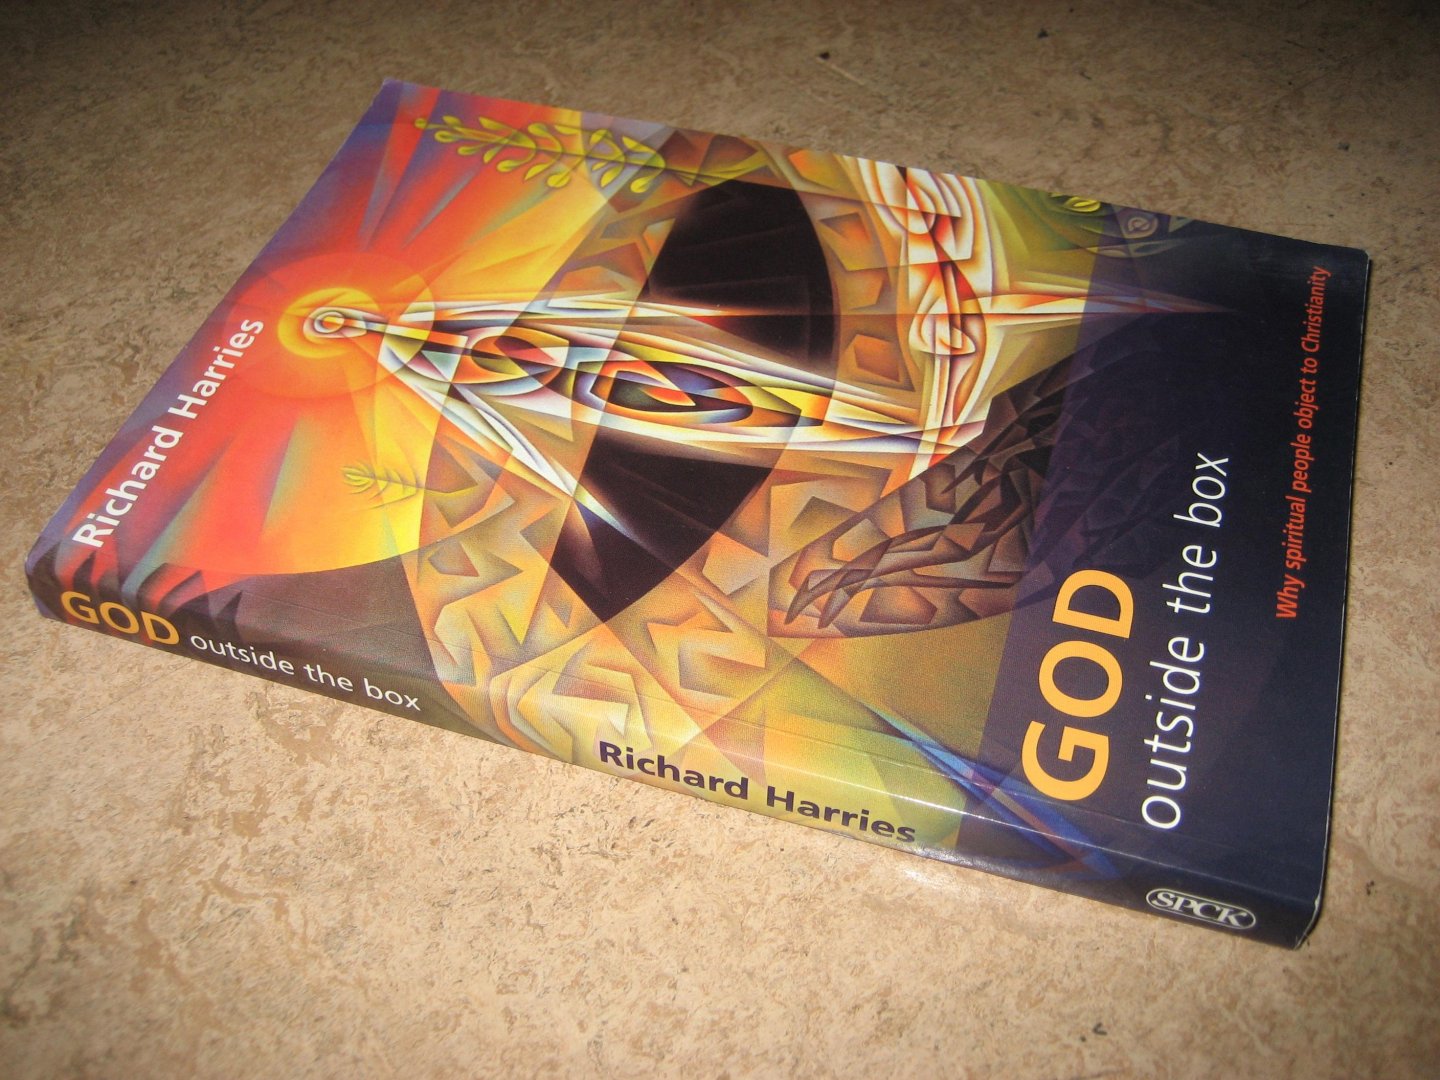 Harries, Richard - God outside the box. Why spiritual people object to Christianity